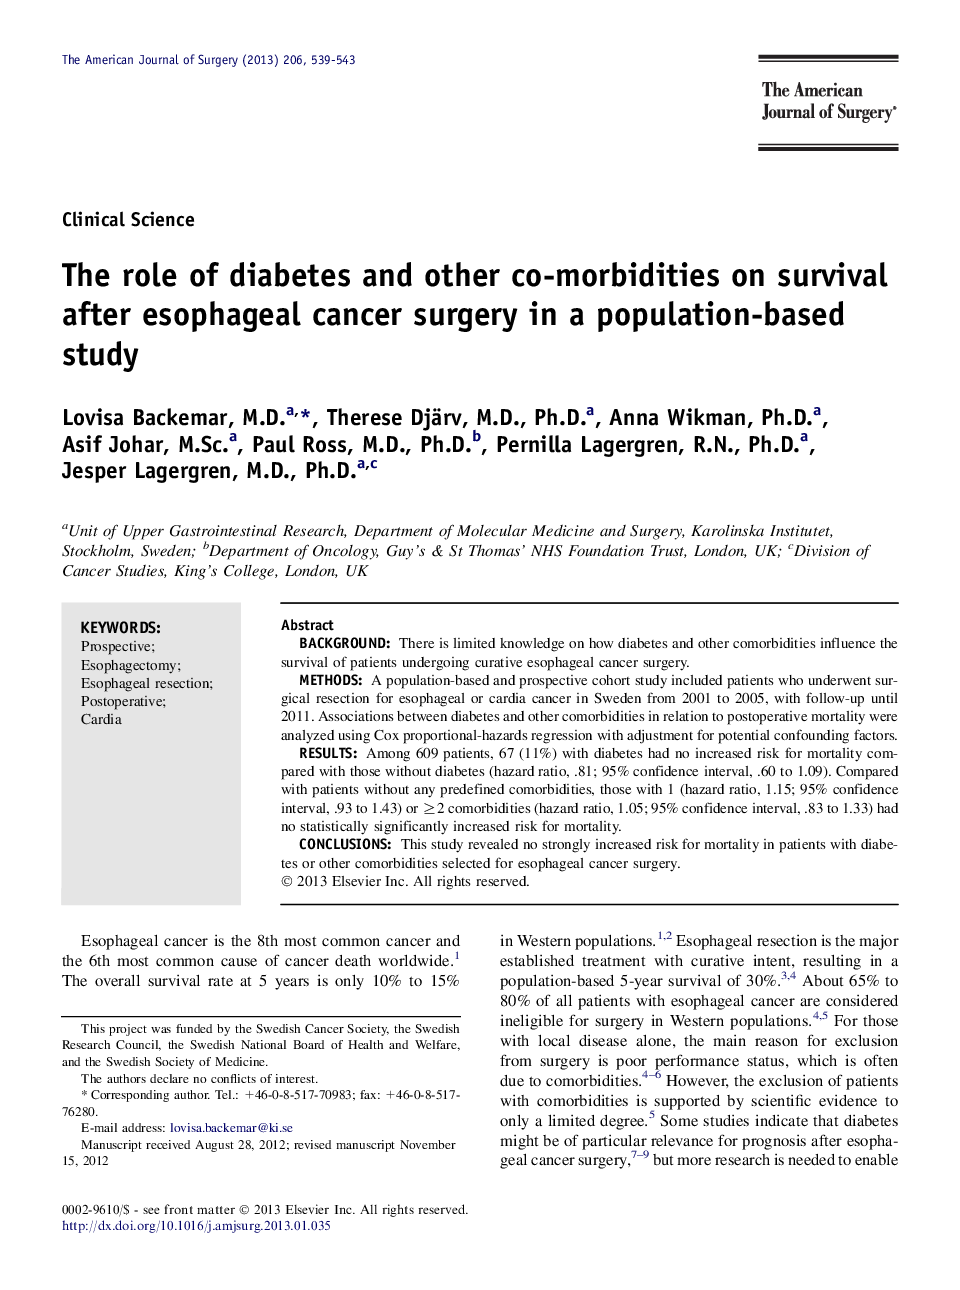 The role of diabetes and other co-morbidities on survival after esophageal cancer surgery in a population-based study 